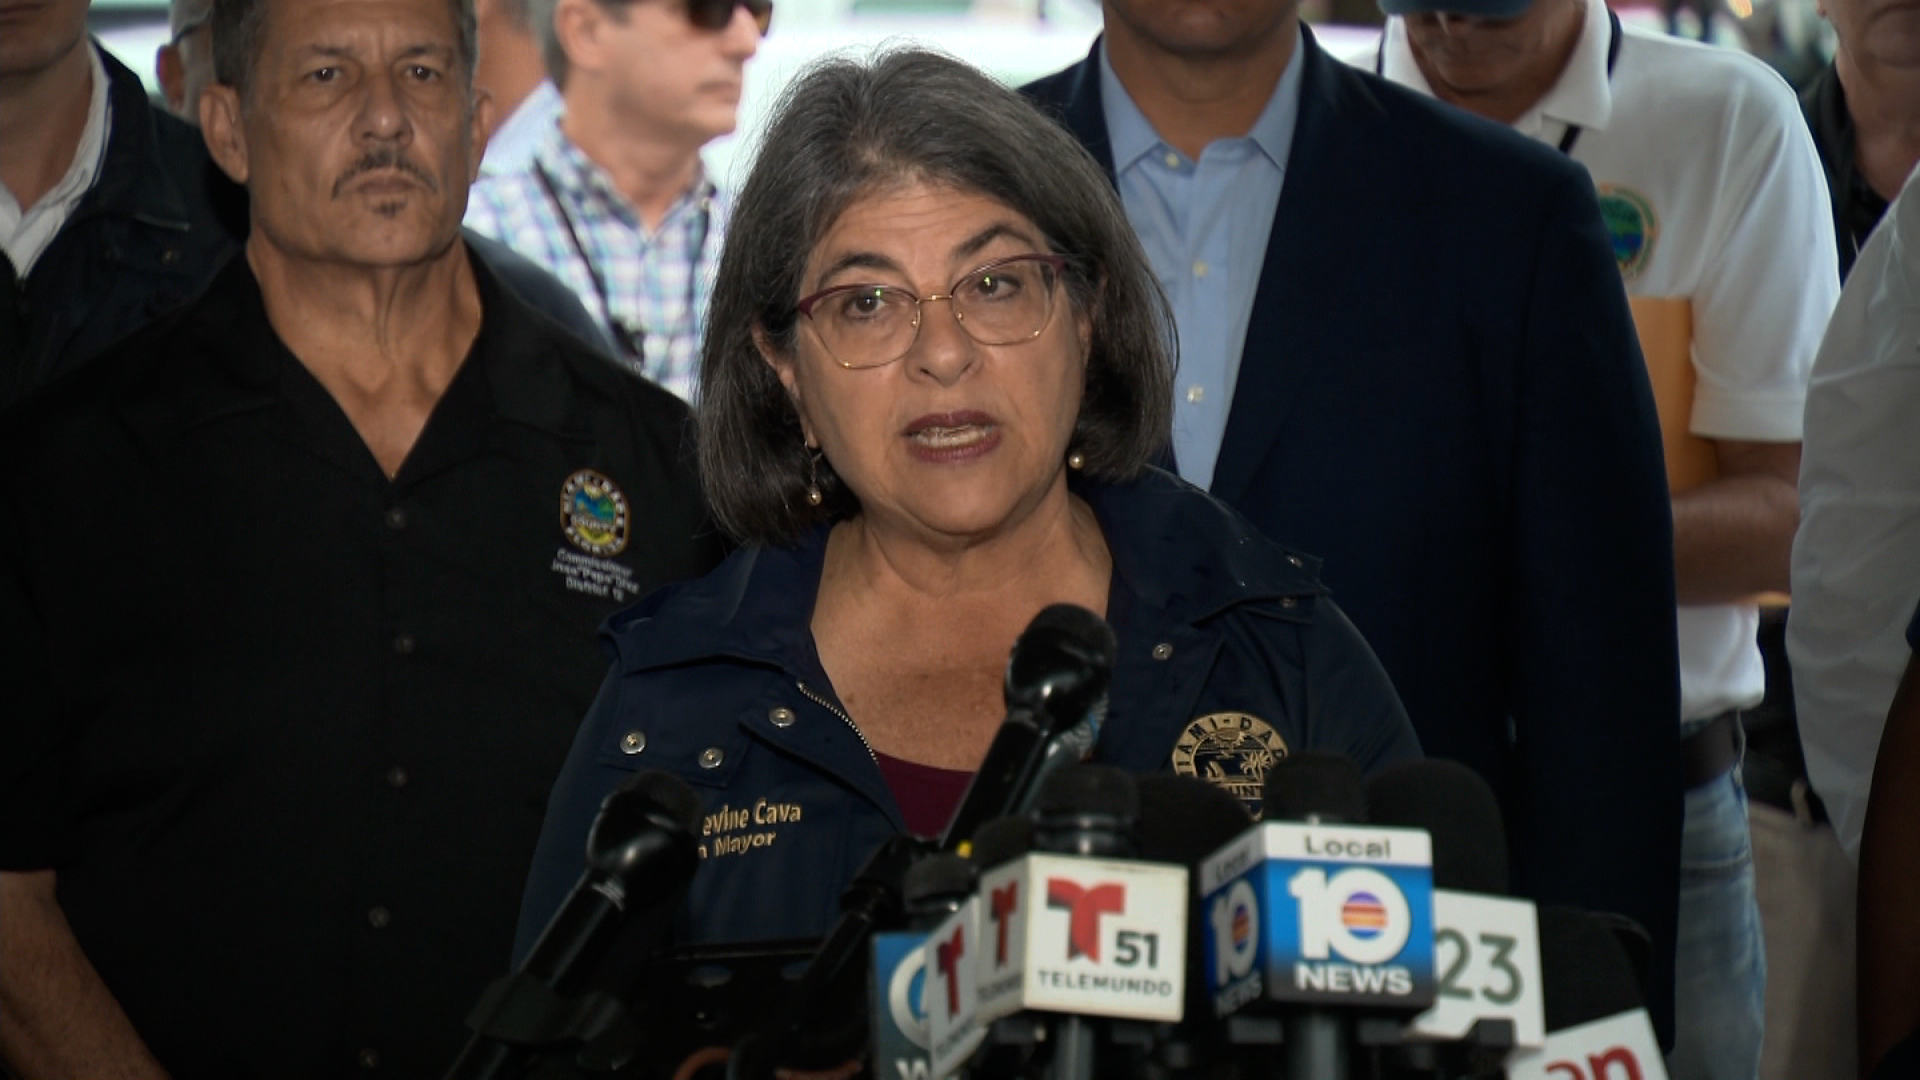 Miami-Dade Mayor Daniella Levine Cava speaks during a press conference in Surfside, Florida, on June 30.